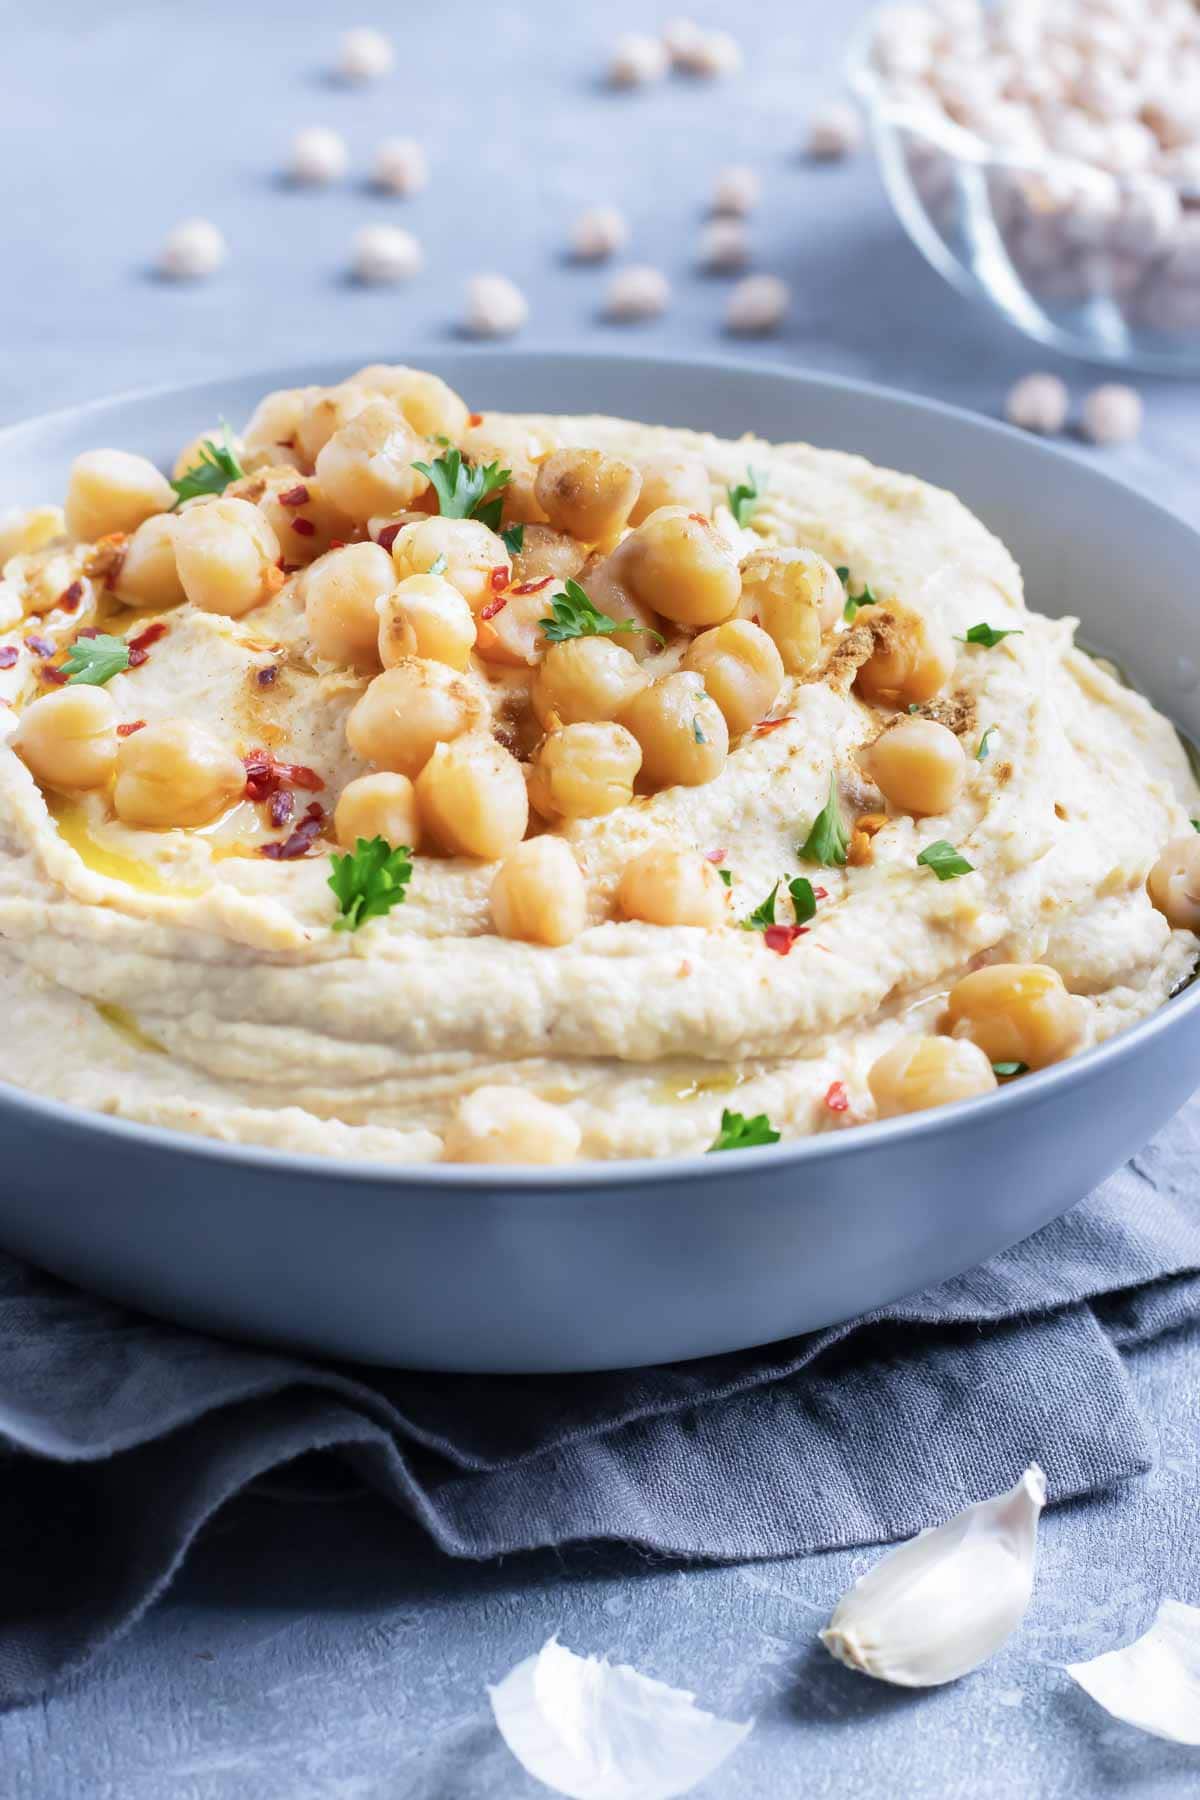 A bowl full of authentic hummus with chickpeas and parsley sprinkled on top.